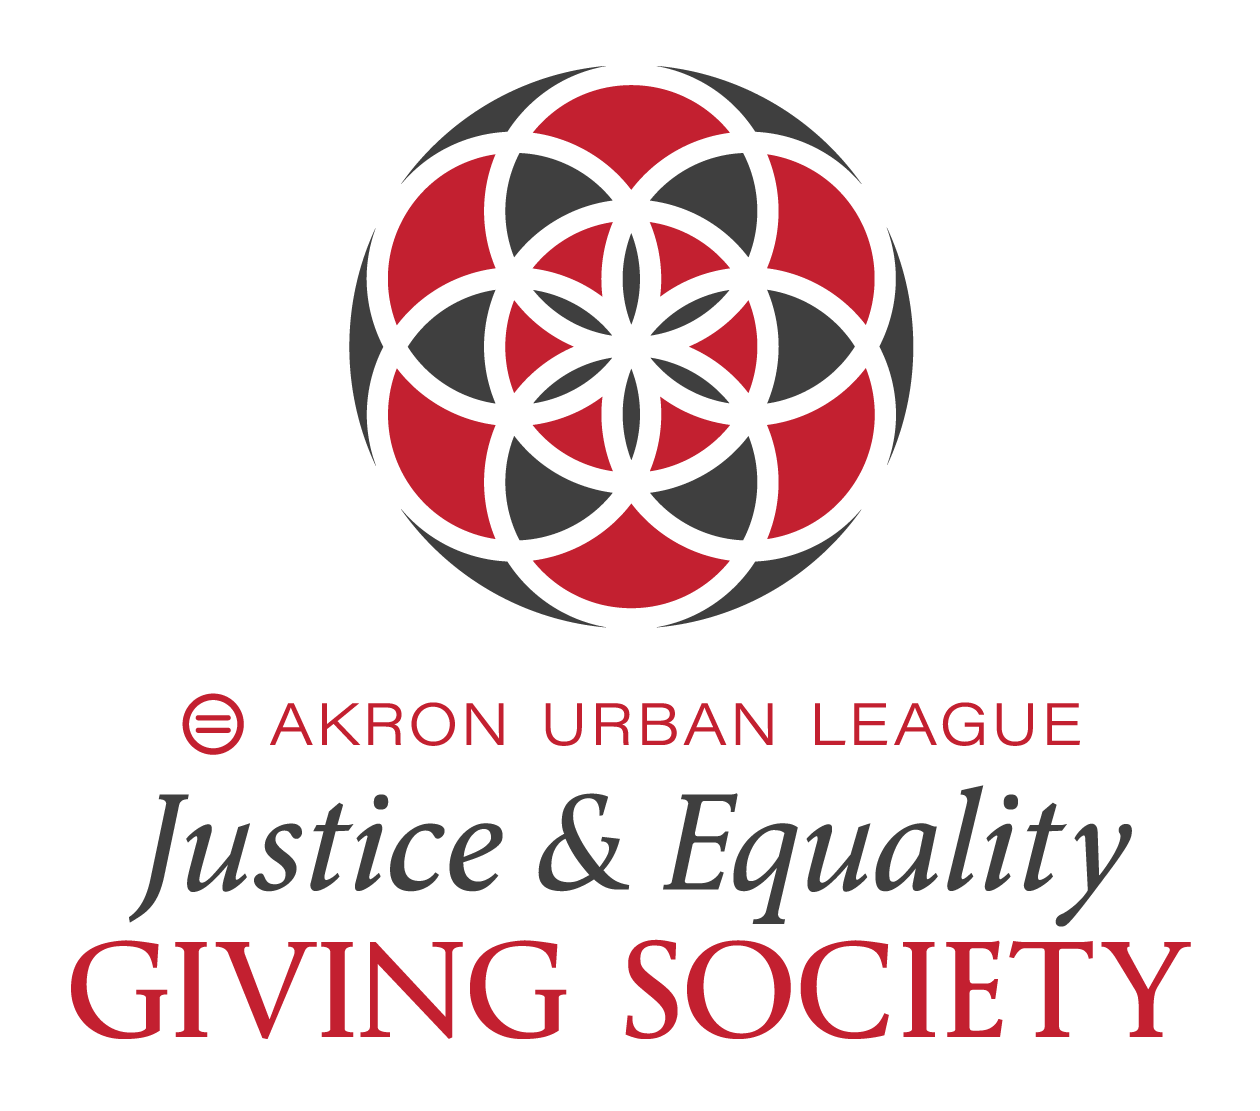 Akron Urban League Justice & Equality Giving Society